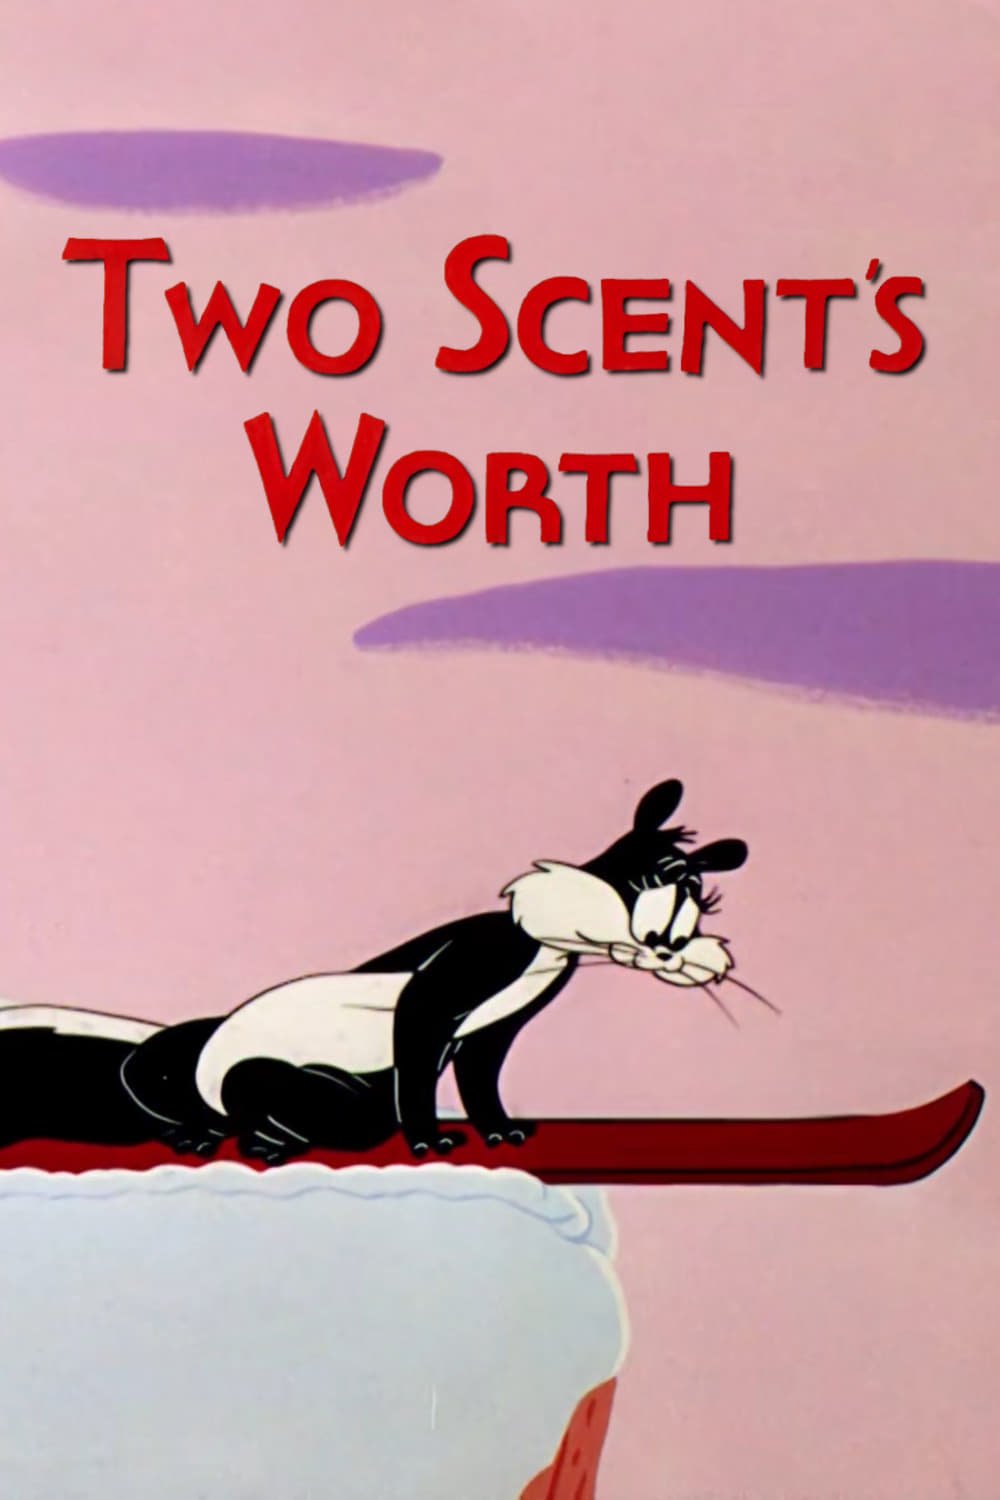 Two Scent's Worth (1955)